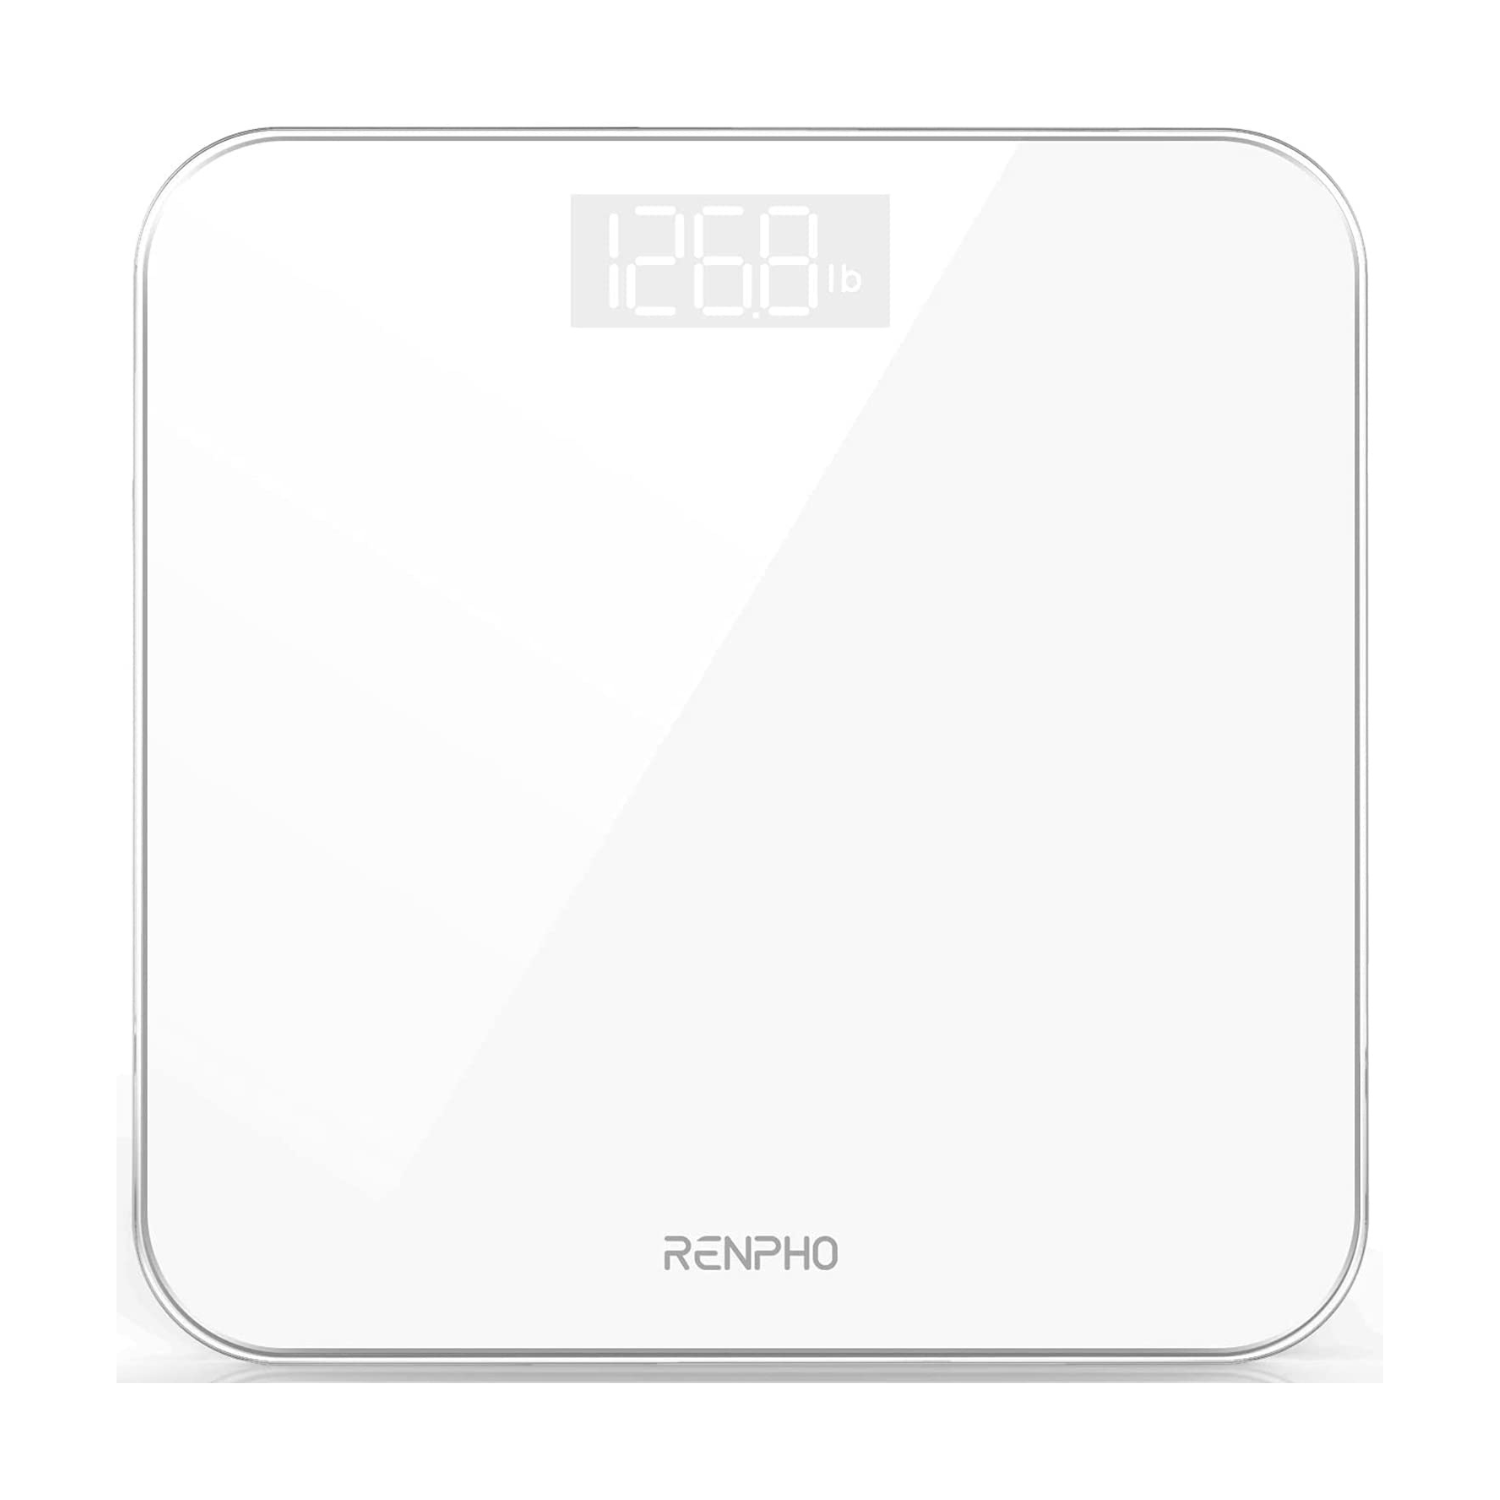 RENPHO Highly Accurate Digital Body Weight Scale, 400 lb, Marble 